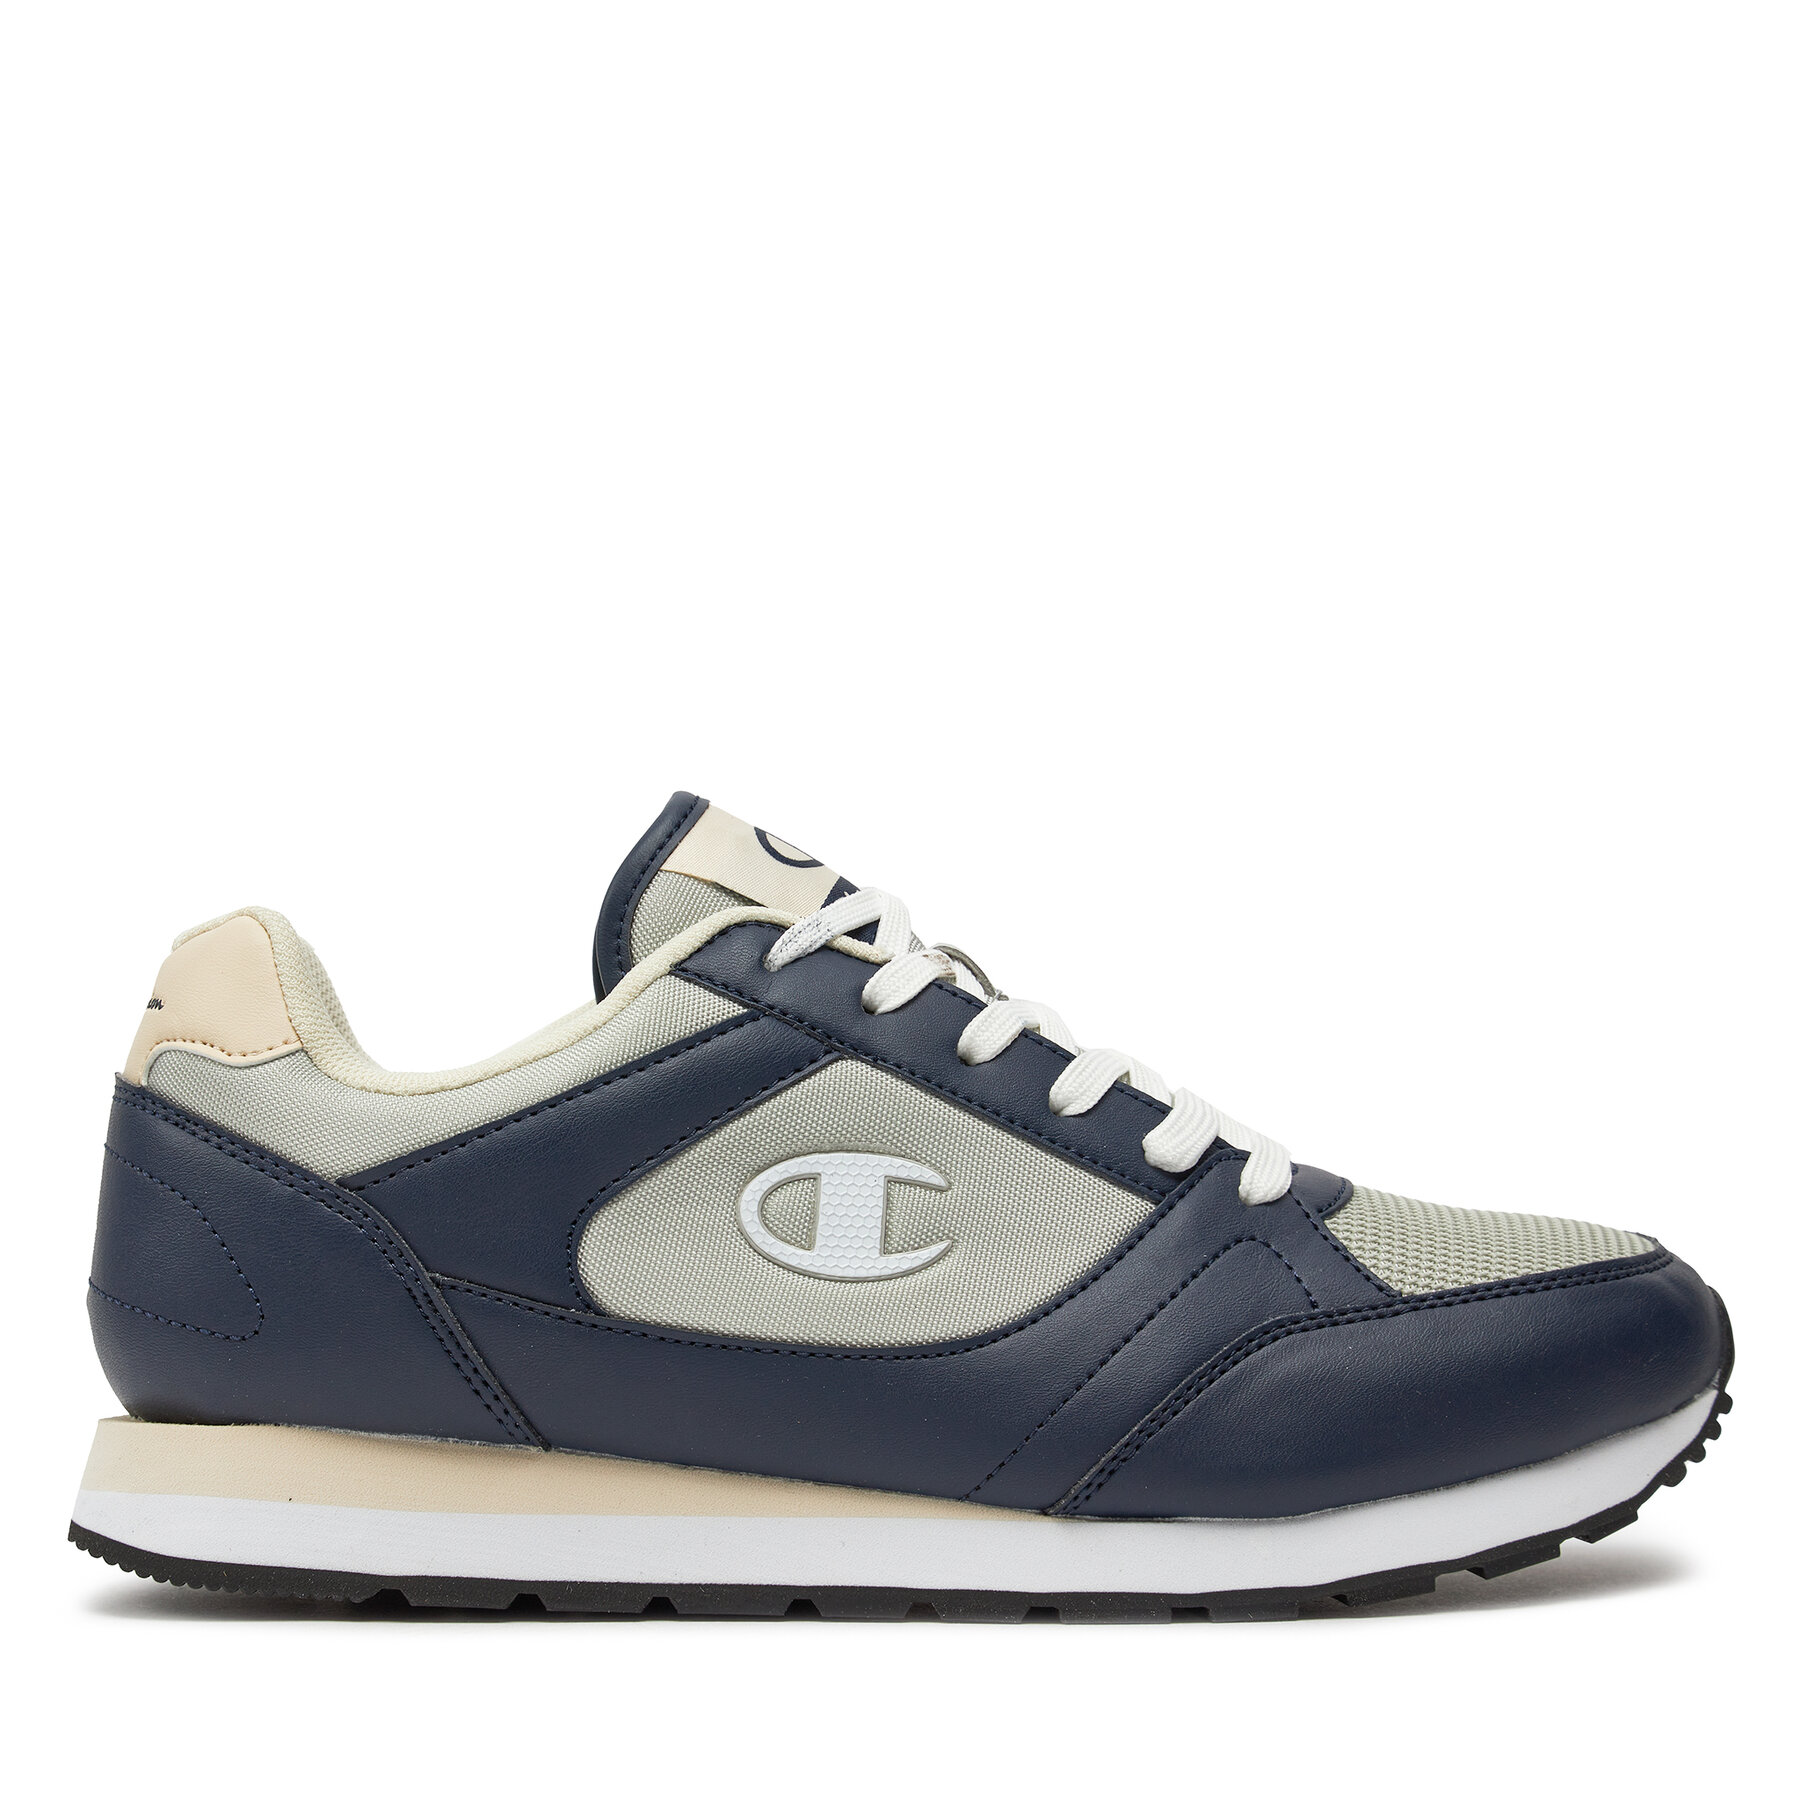 Sneakers Champion Rr Champ Ii Mix Material Low Cut Shoe S22168-CHA-BS509 Nny/Grey/Ofw von Champion